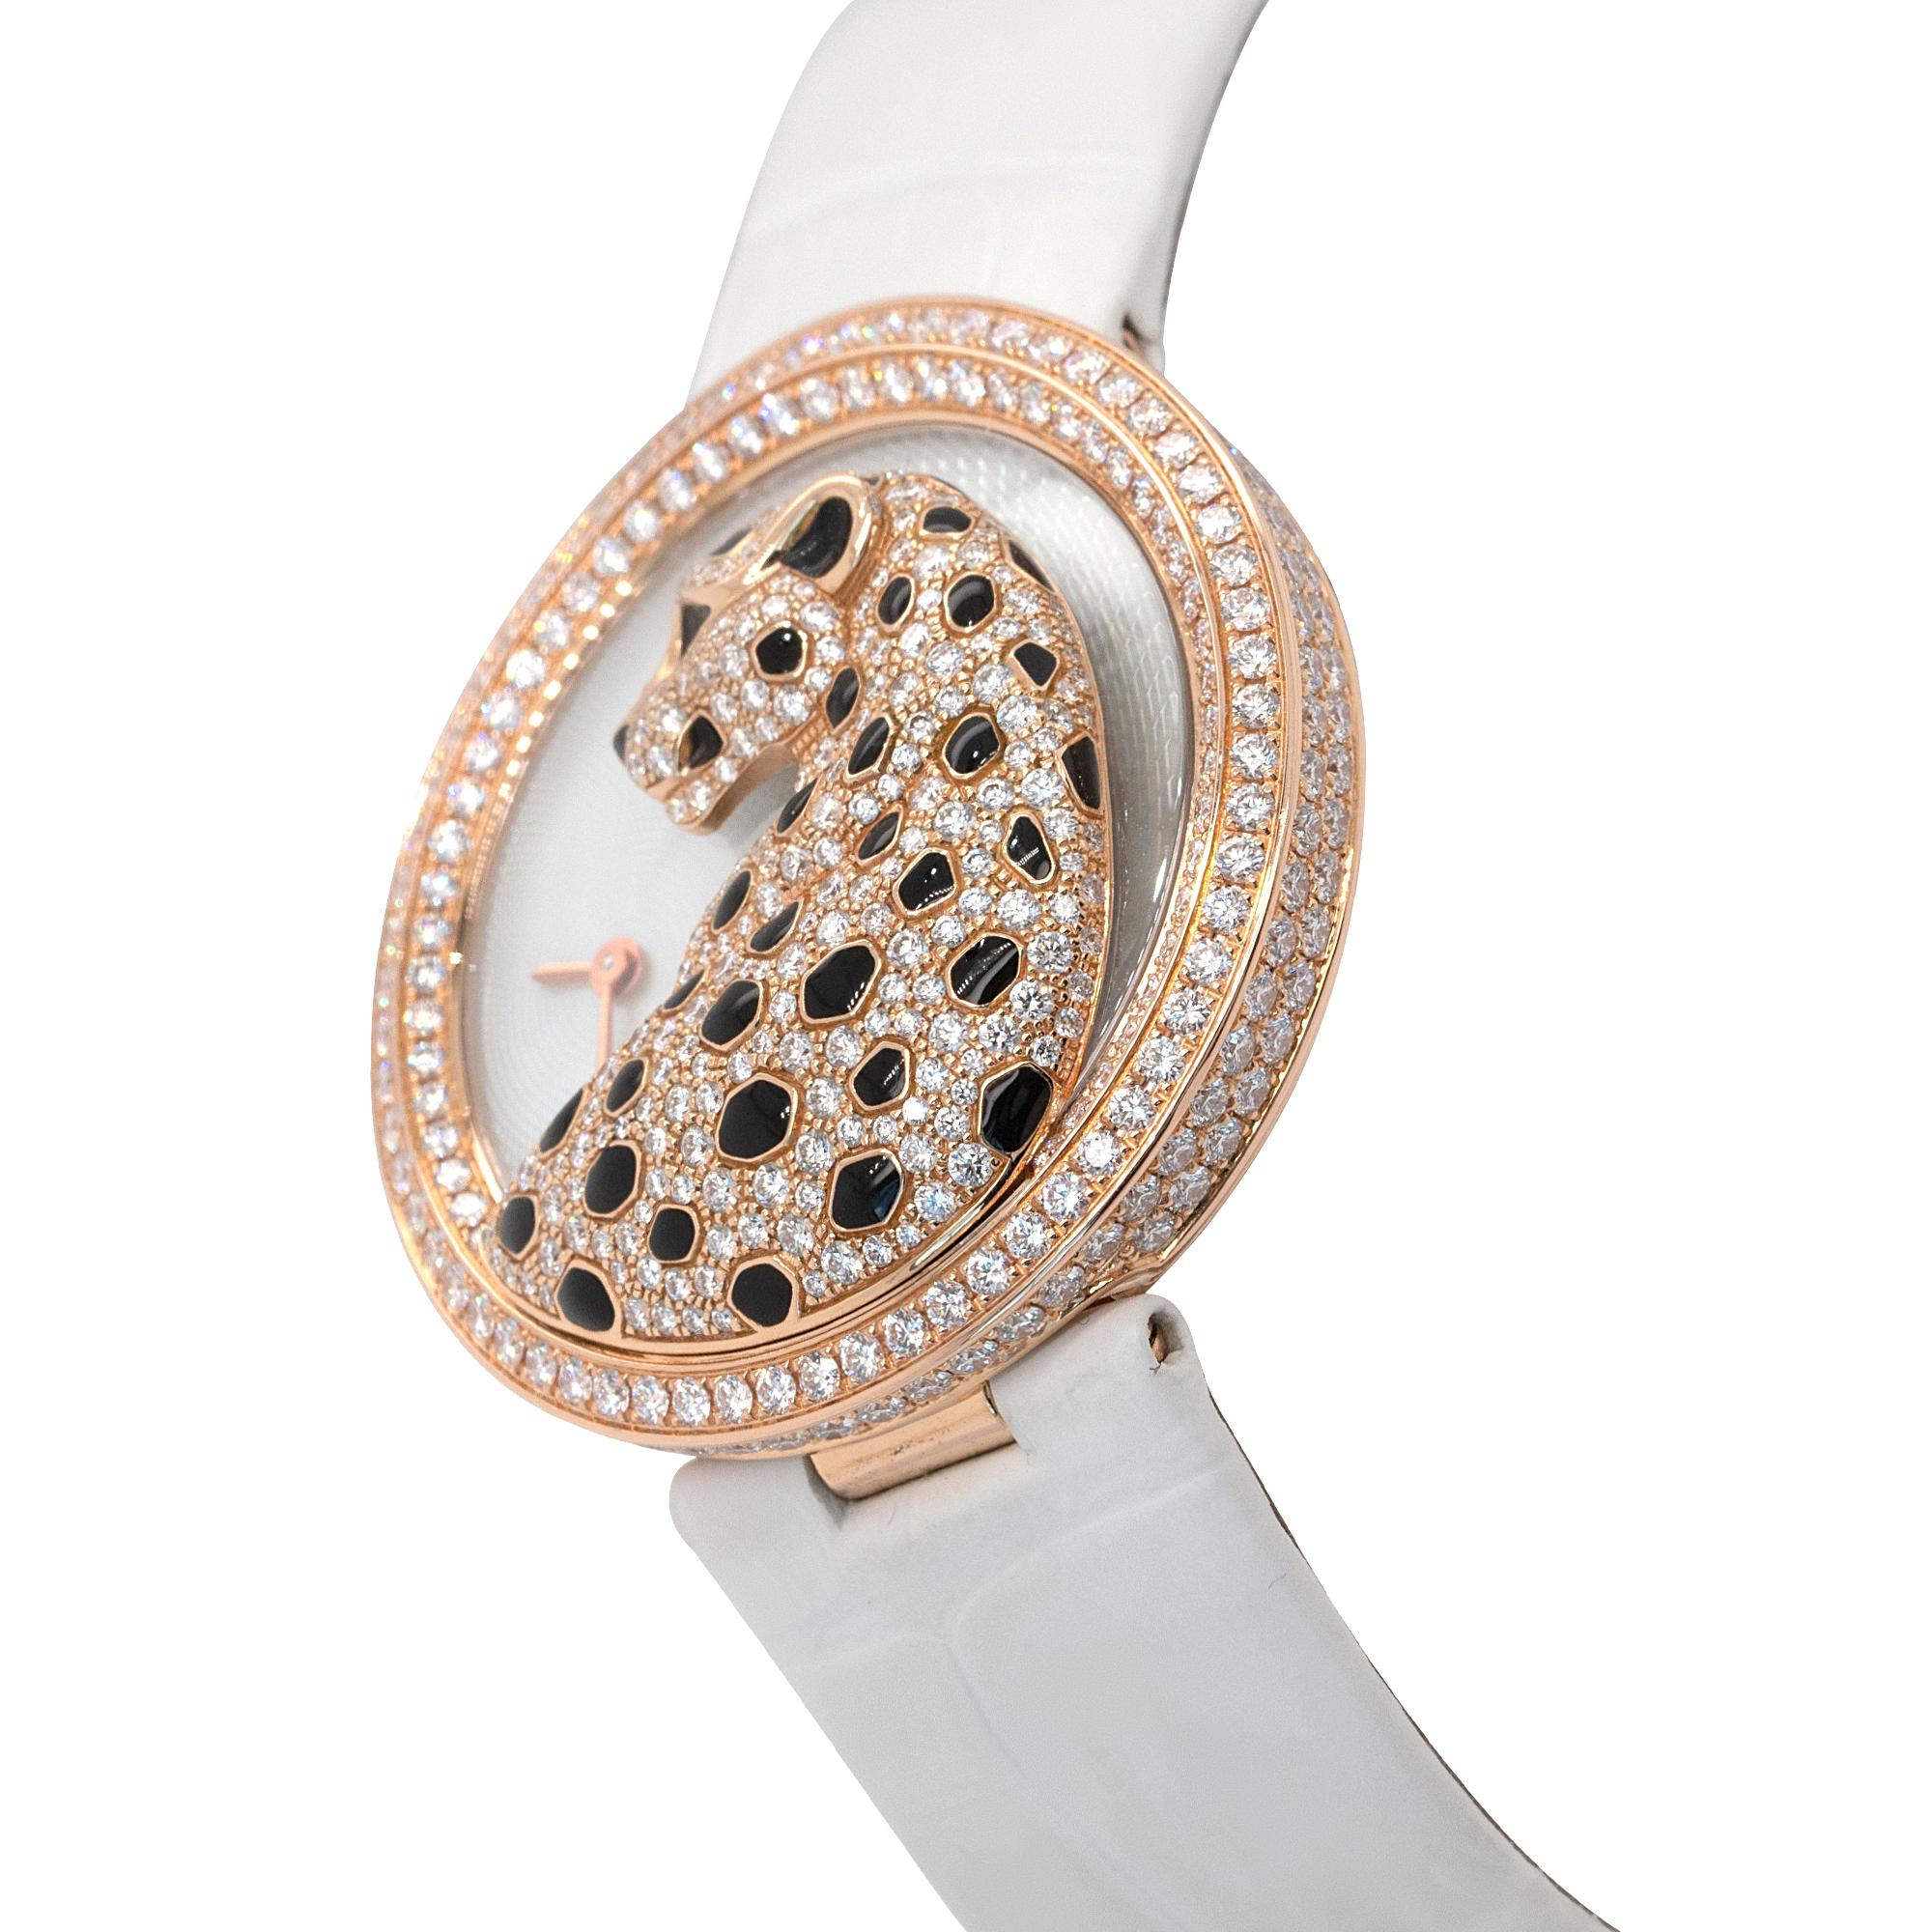 Cartier HPI00762 Panthere Divine Diamond Ladies Watch In Excellent Condition For Sale In Boca Raton, FL